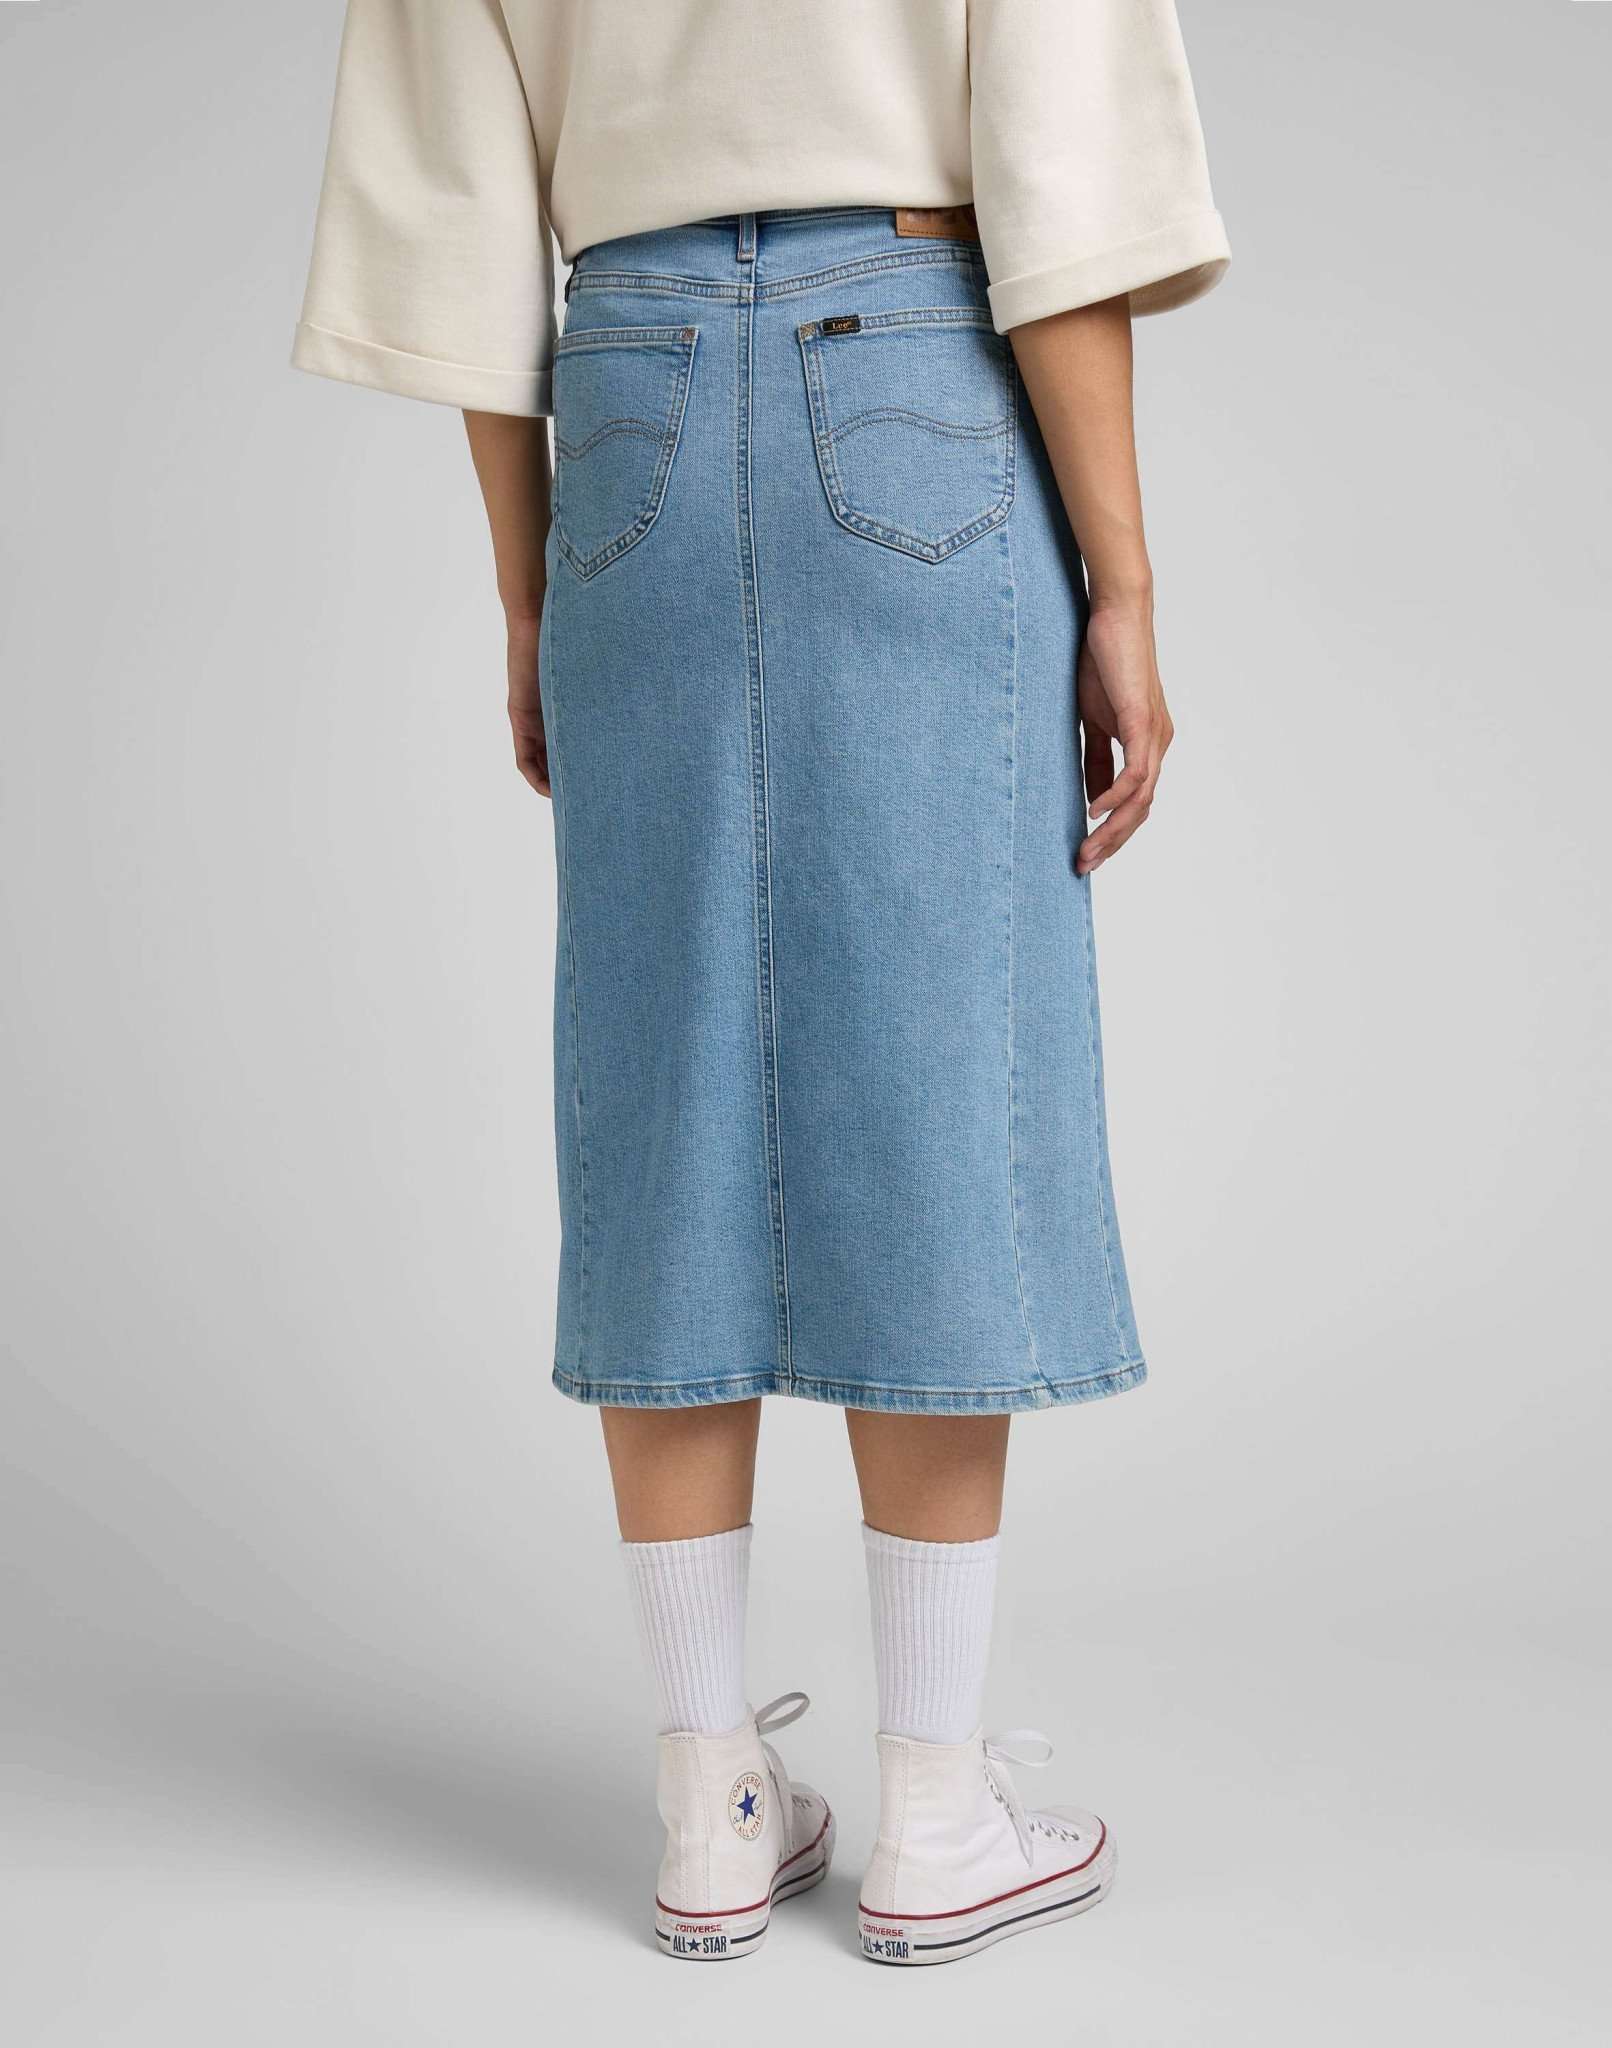 Midi Skirt in Partly Cloudy Röcke Lee   